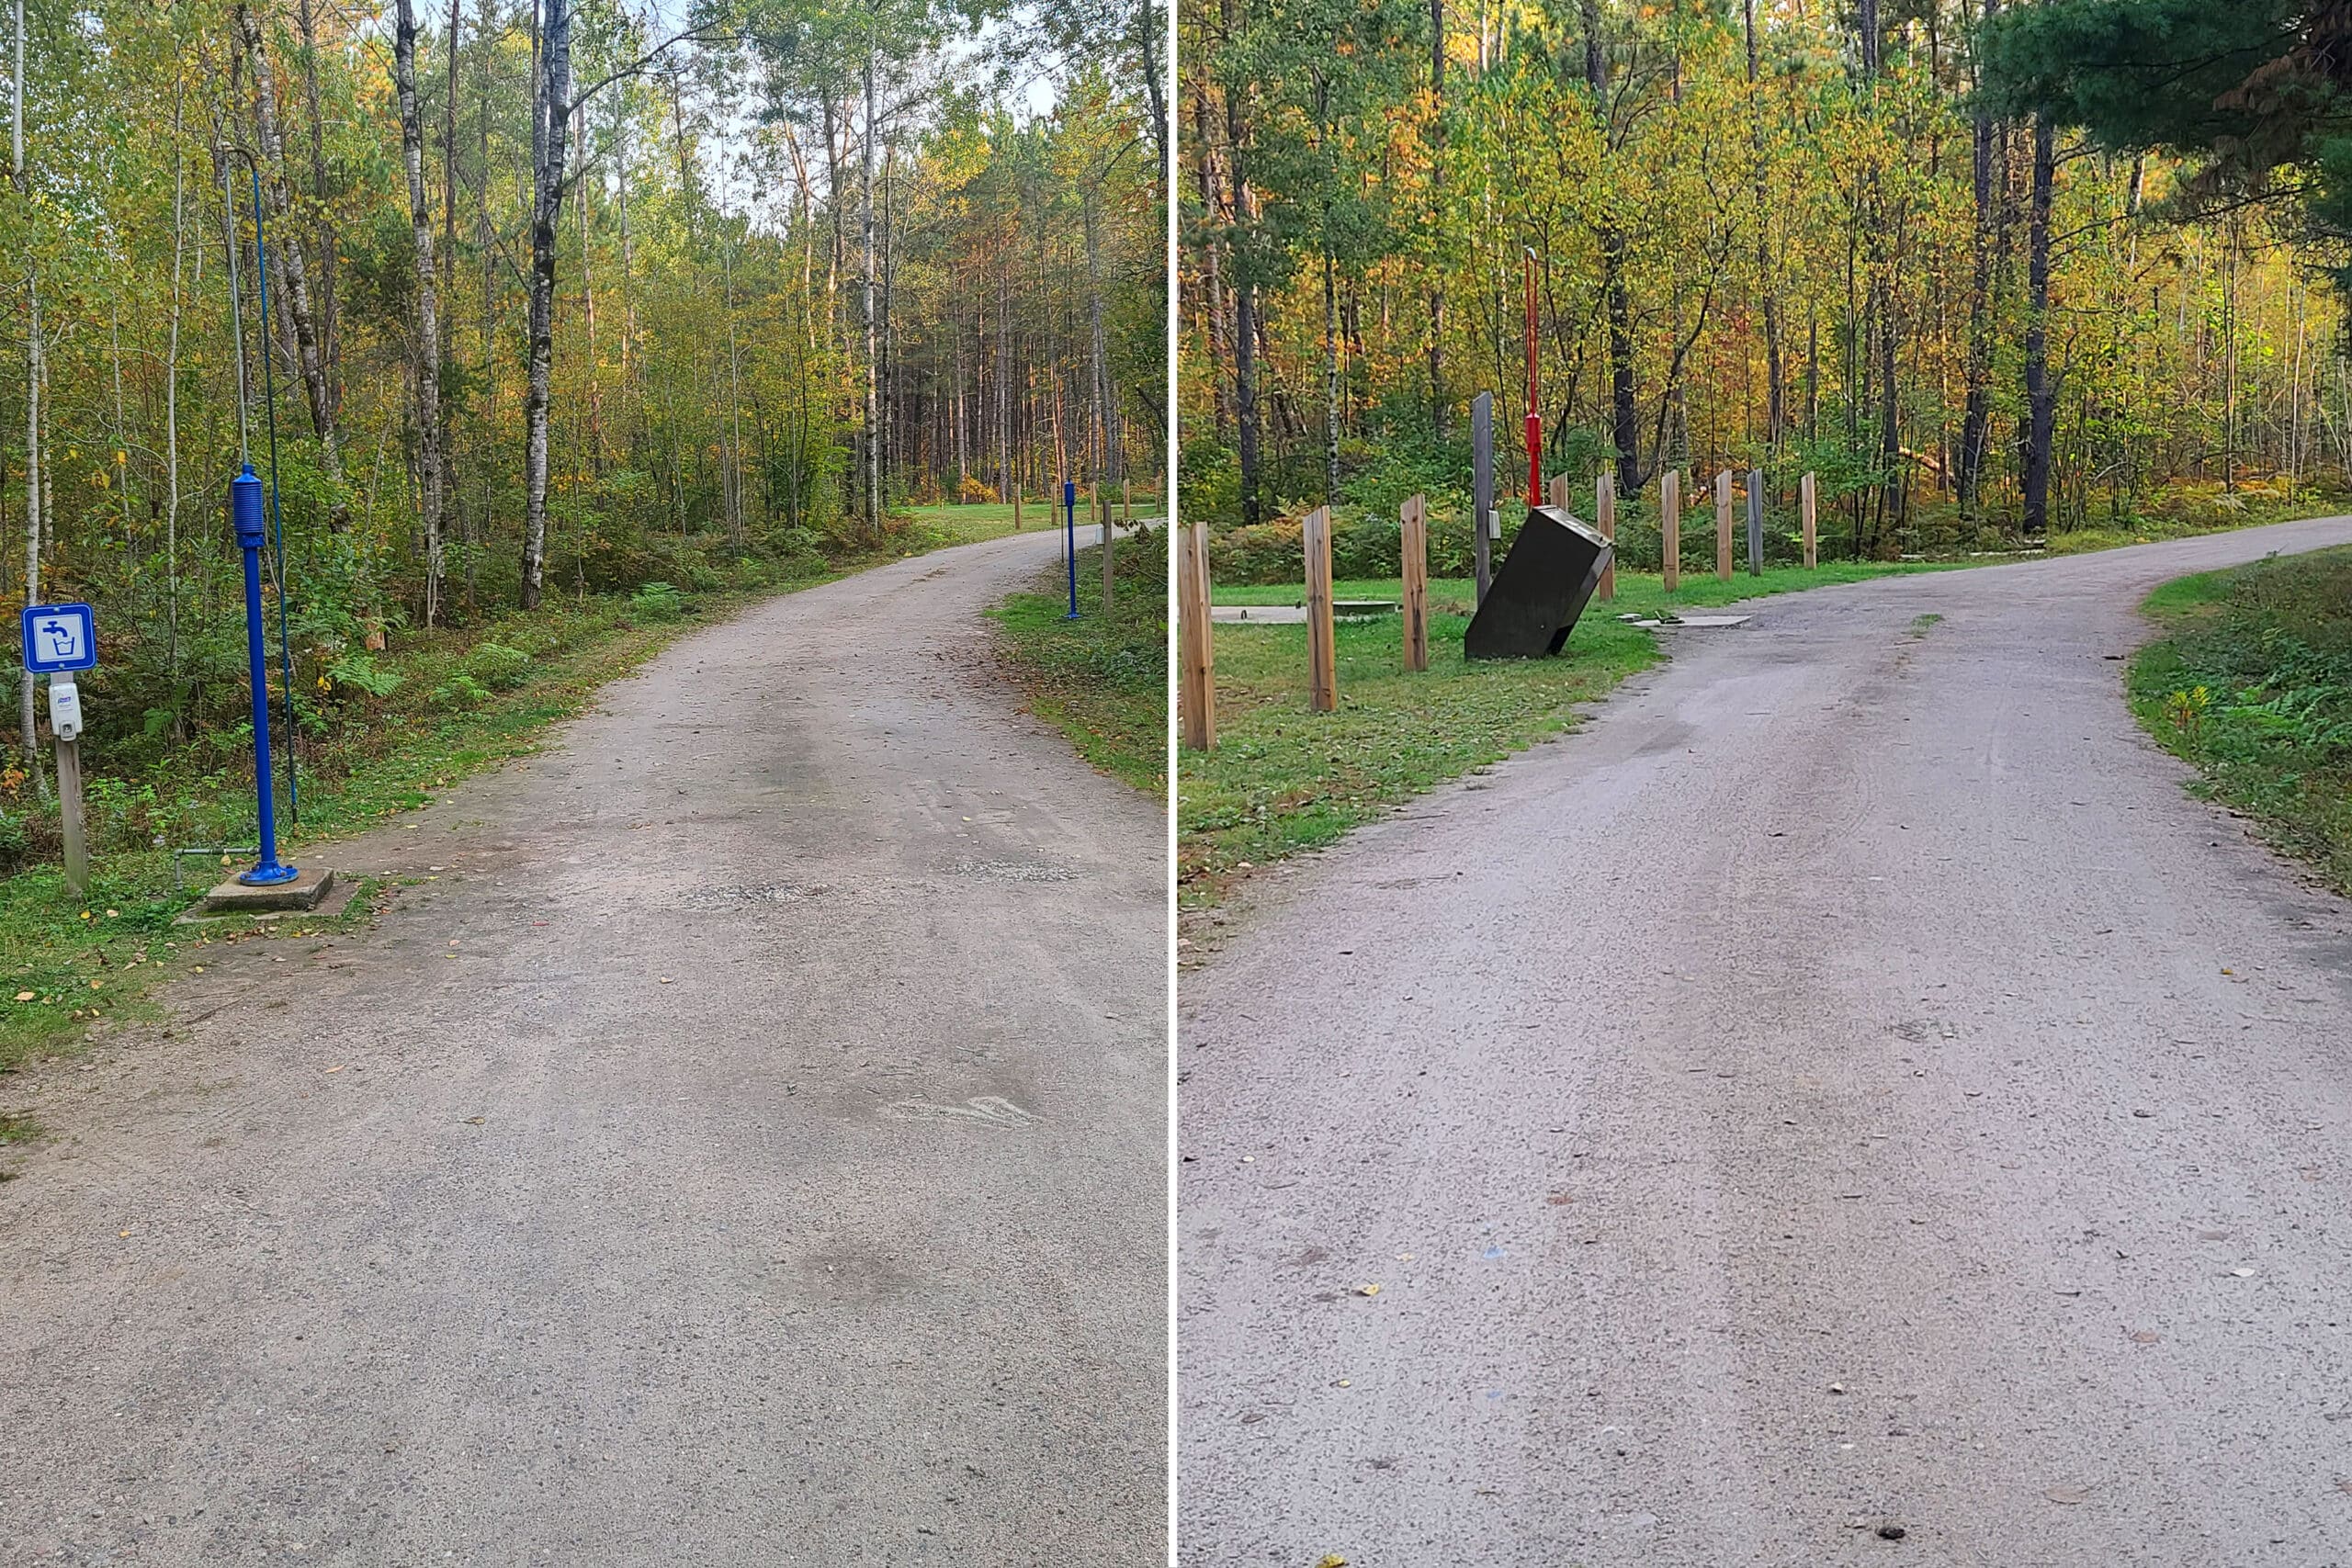 2 part image showing 2 fill stations and one dumping station at the park.